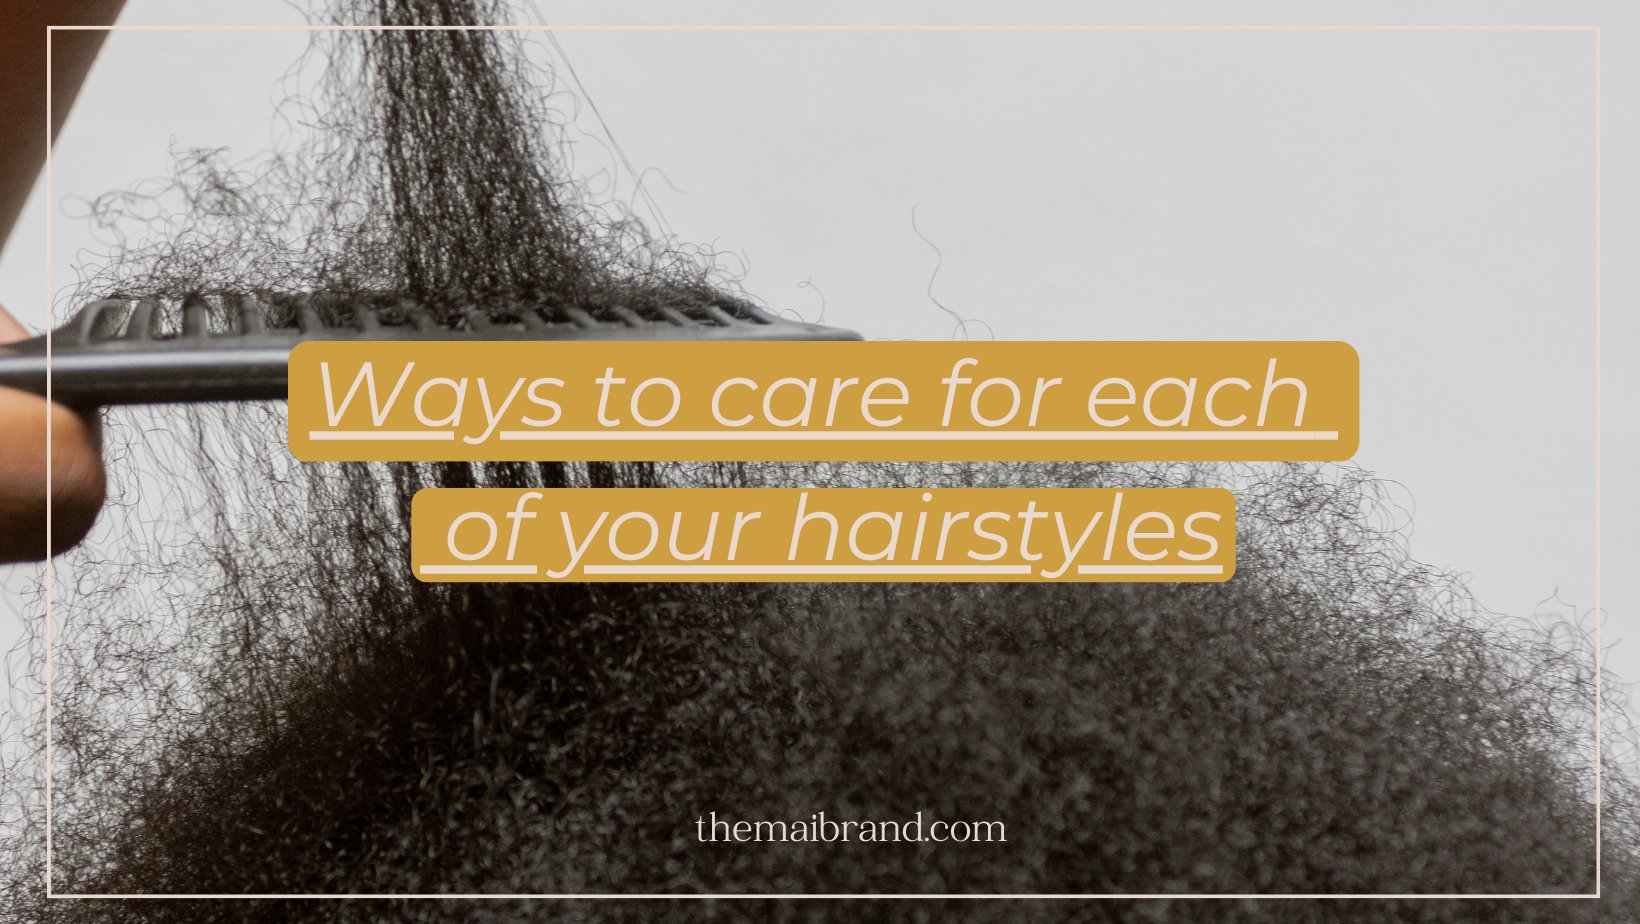 How to care for each of your hairstyles - maibeauty